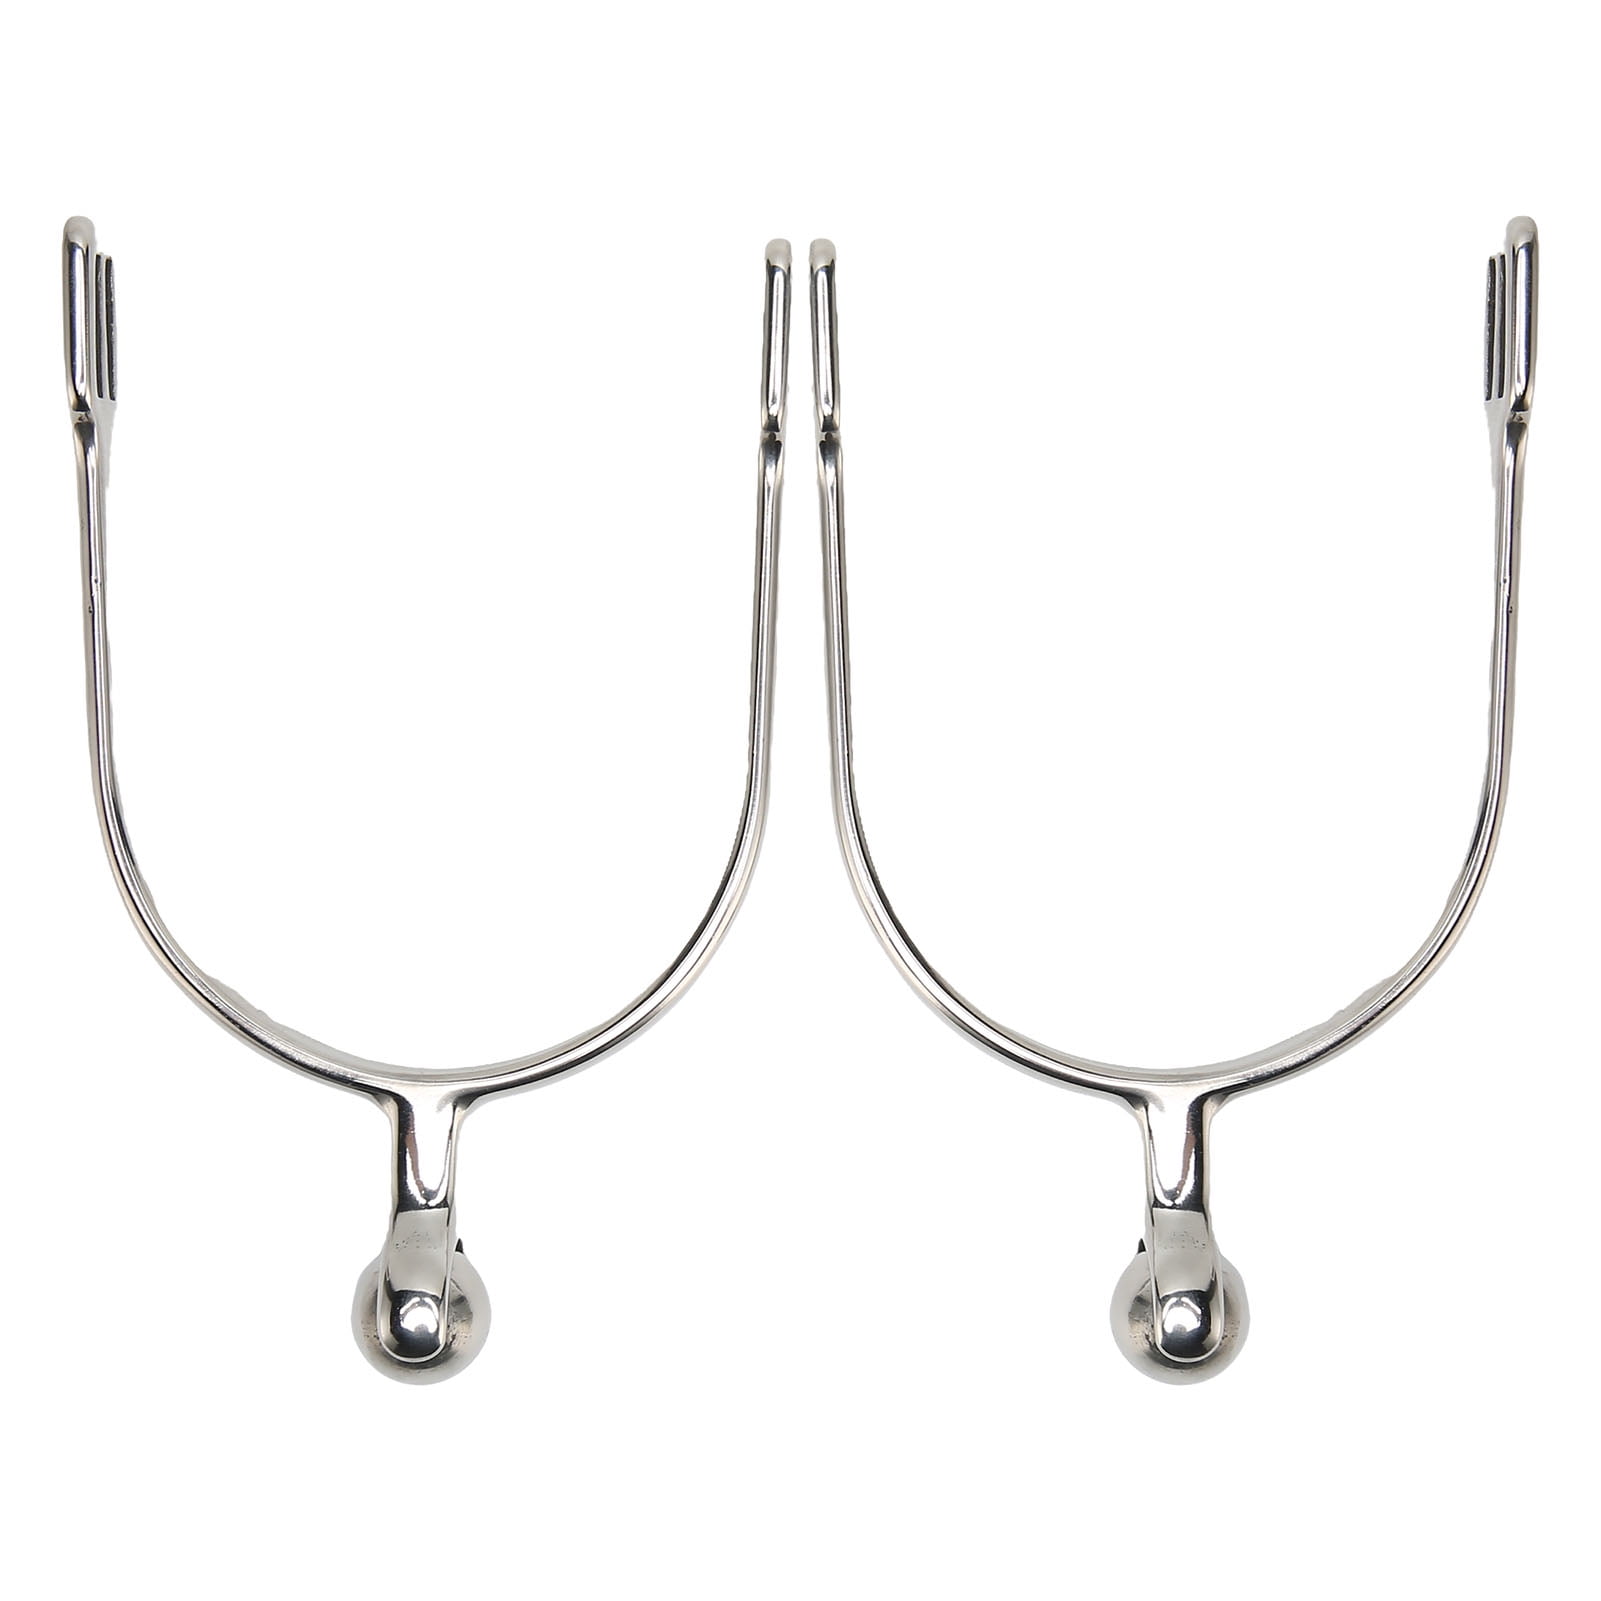 Horse Spurs, Rustproof Stainless Steel Portable Horse Riding Spurs ...